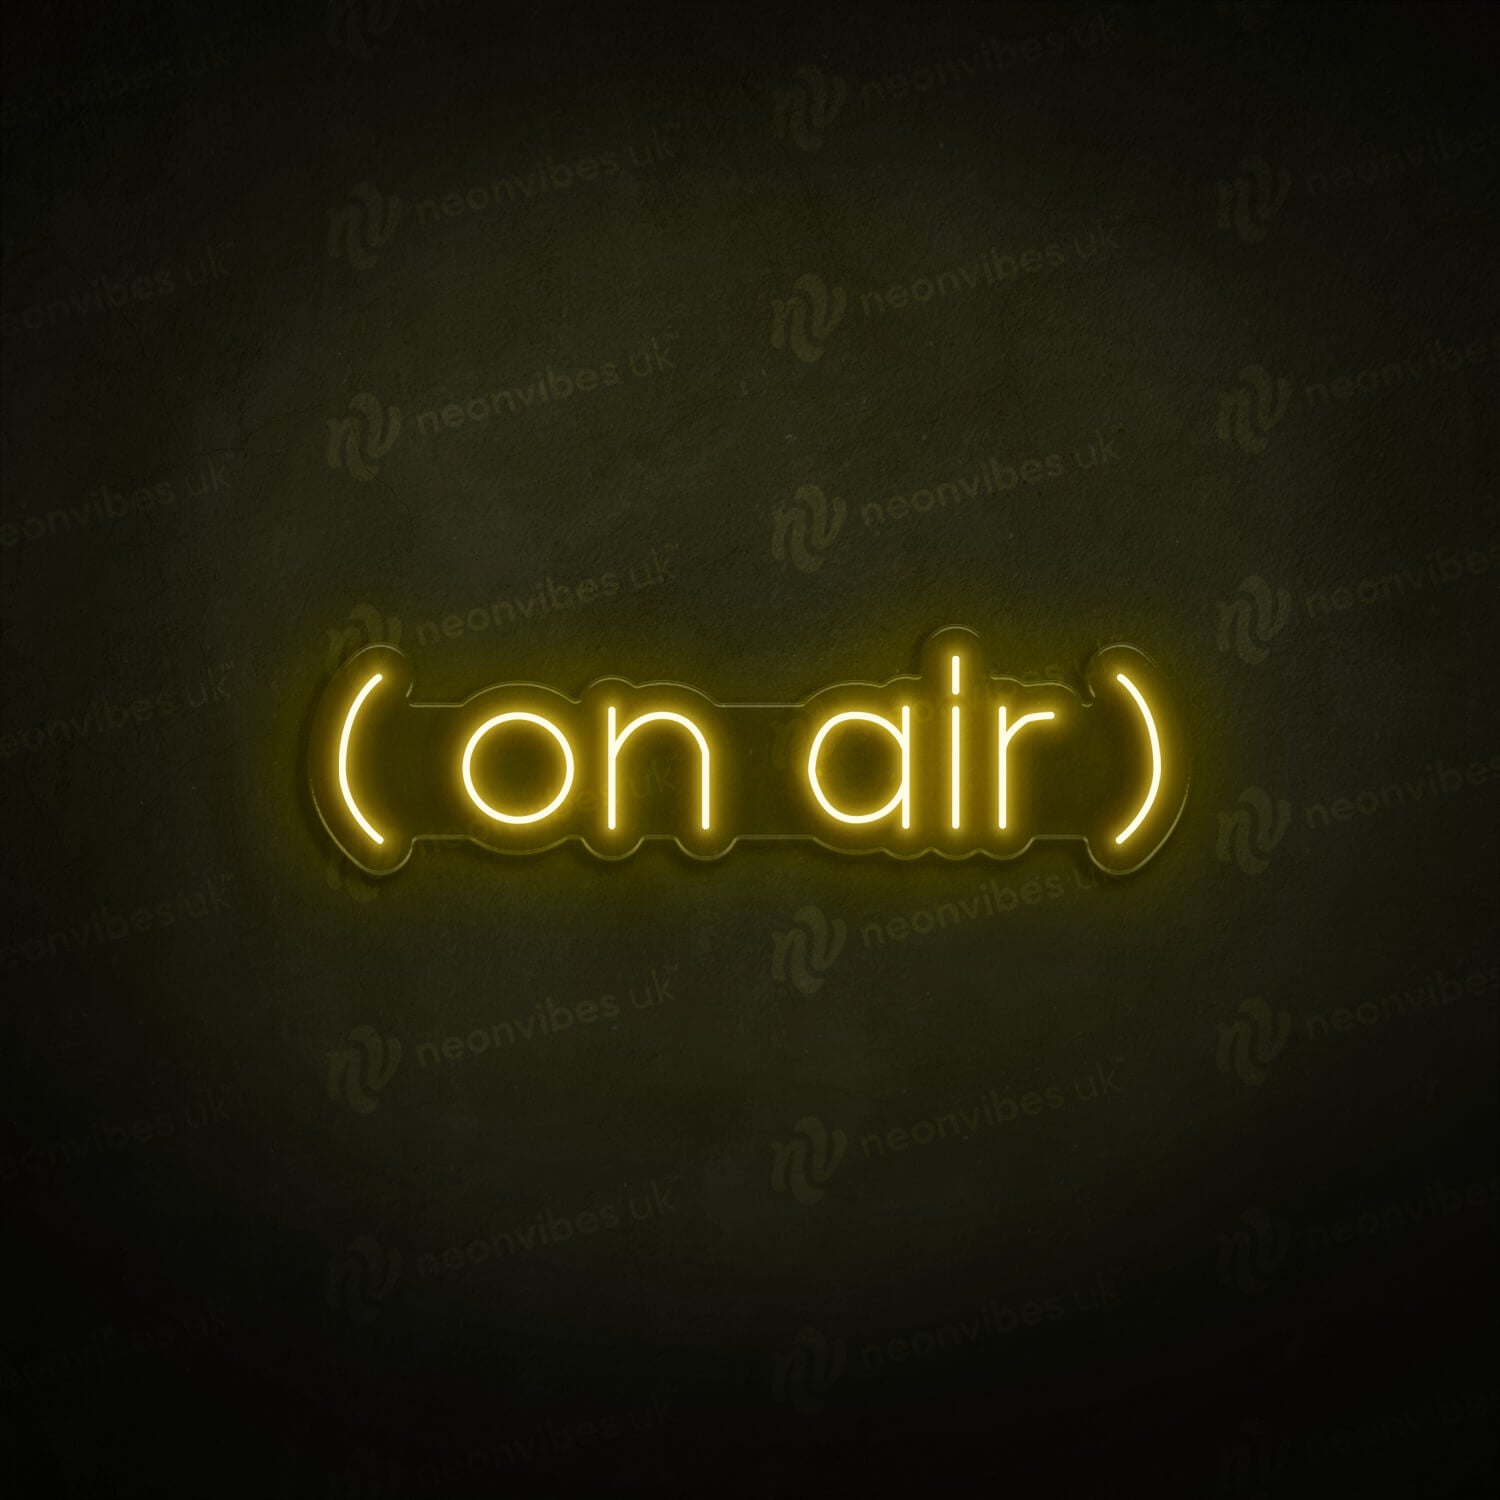 On Air neon sign